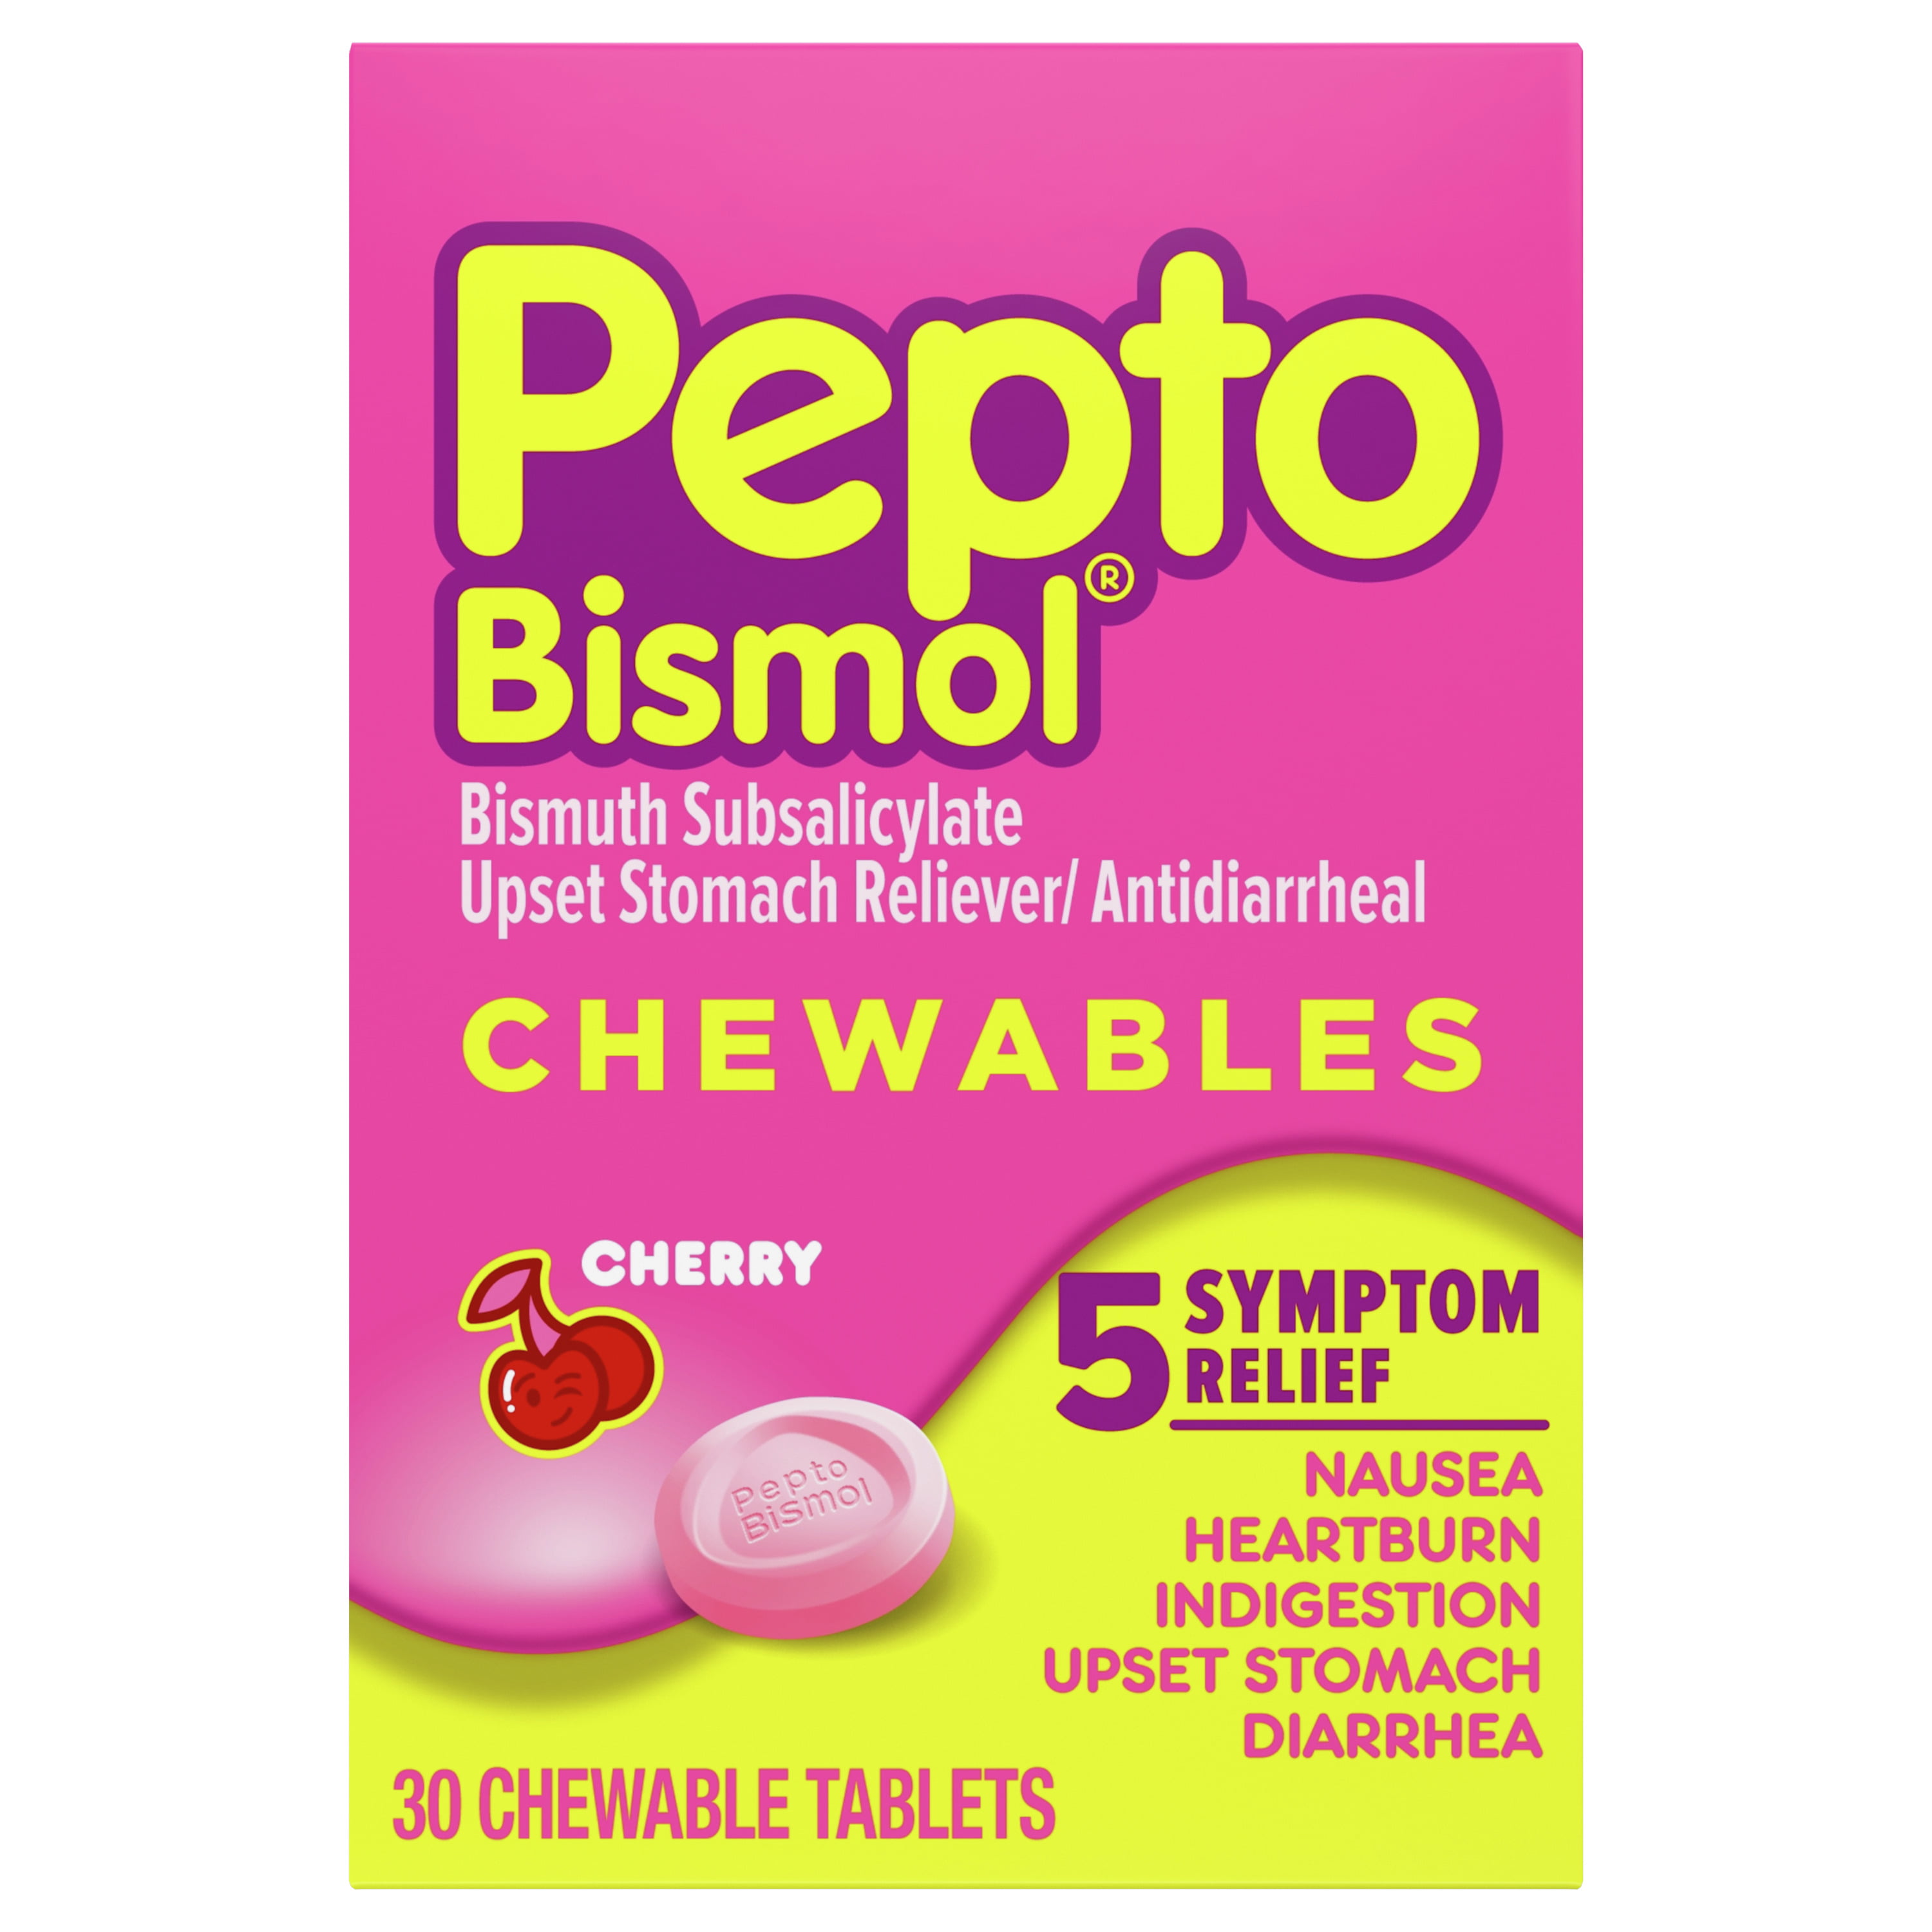 Pepto Bismol Chewable Tablets 5 Symptom Stomach Relief, Cherry, 30 ct